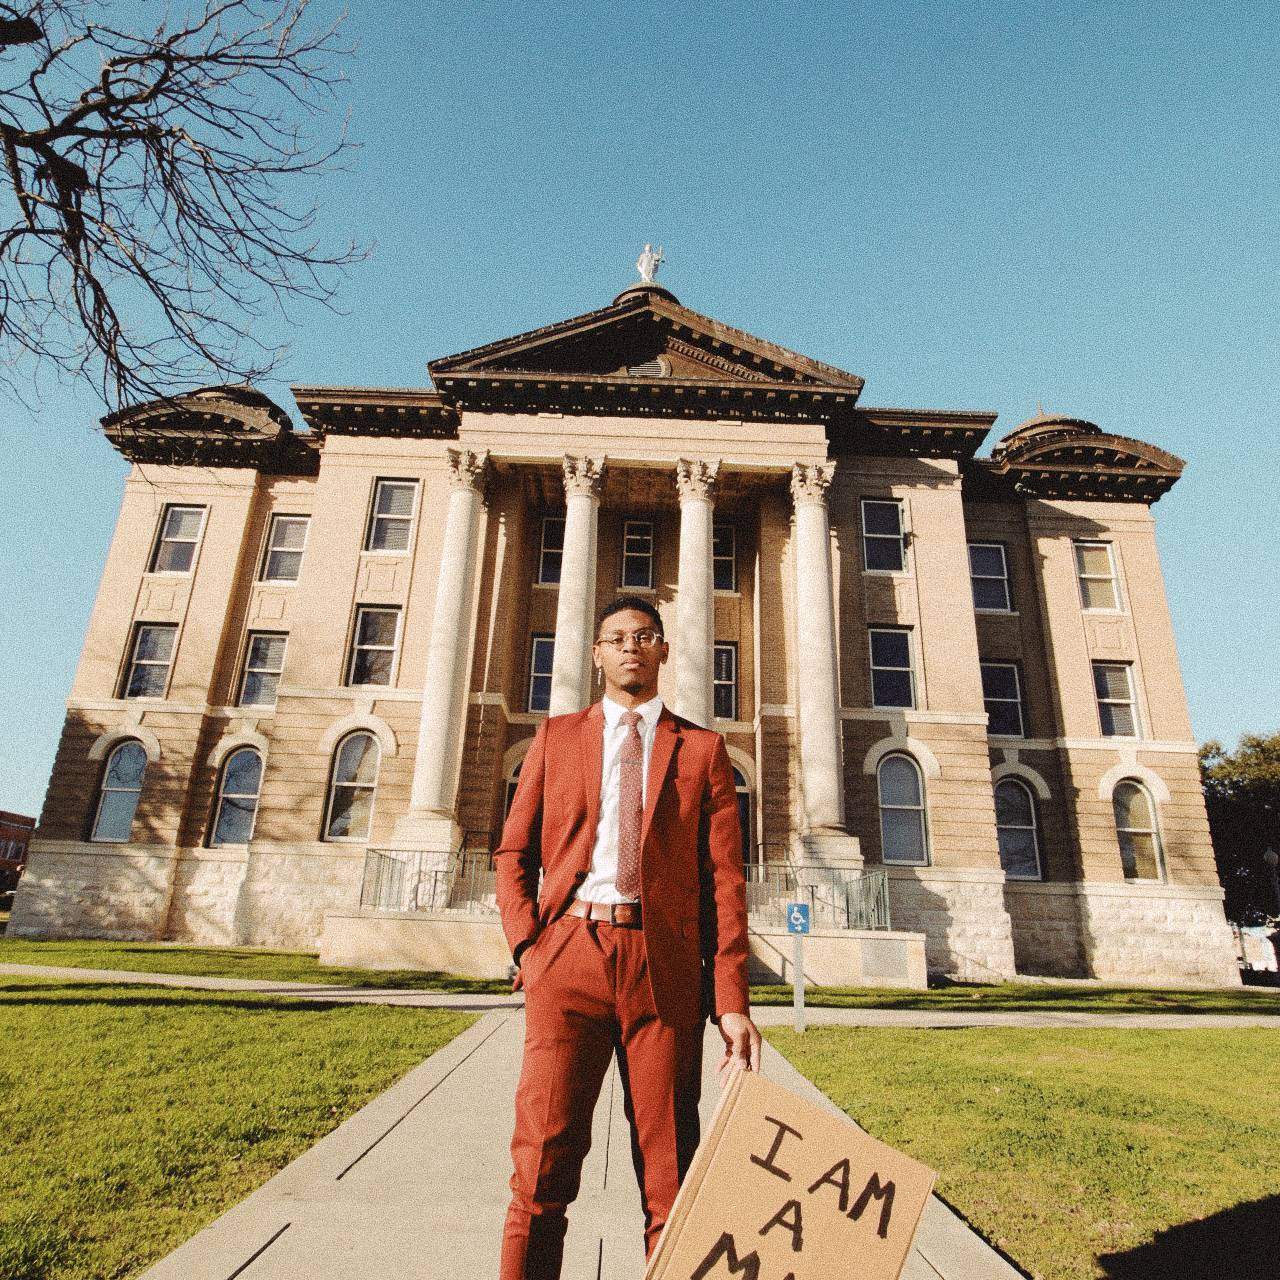 man in red suit standing in front of court house with sign